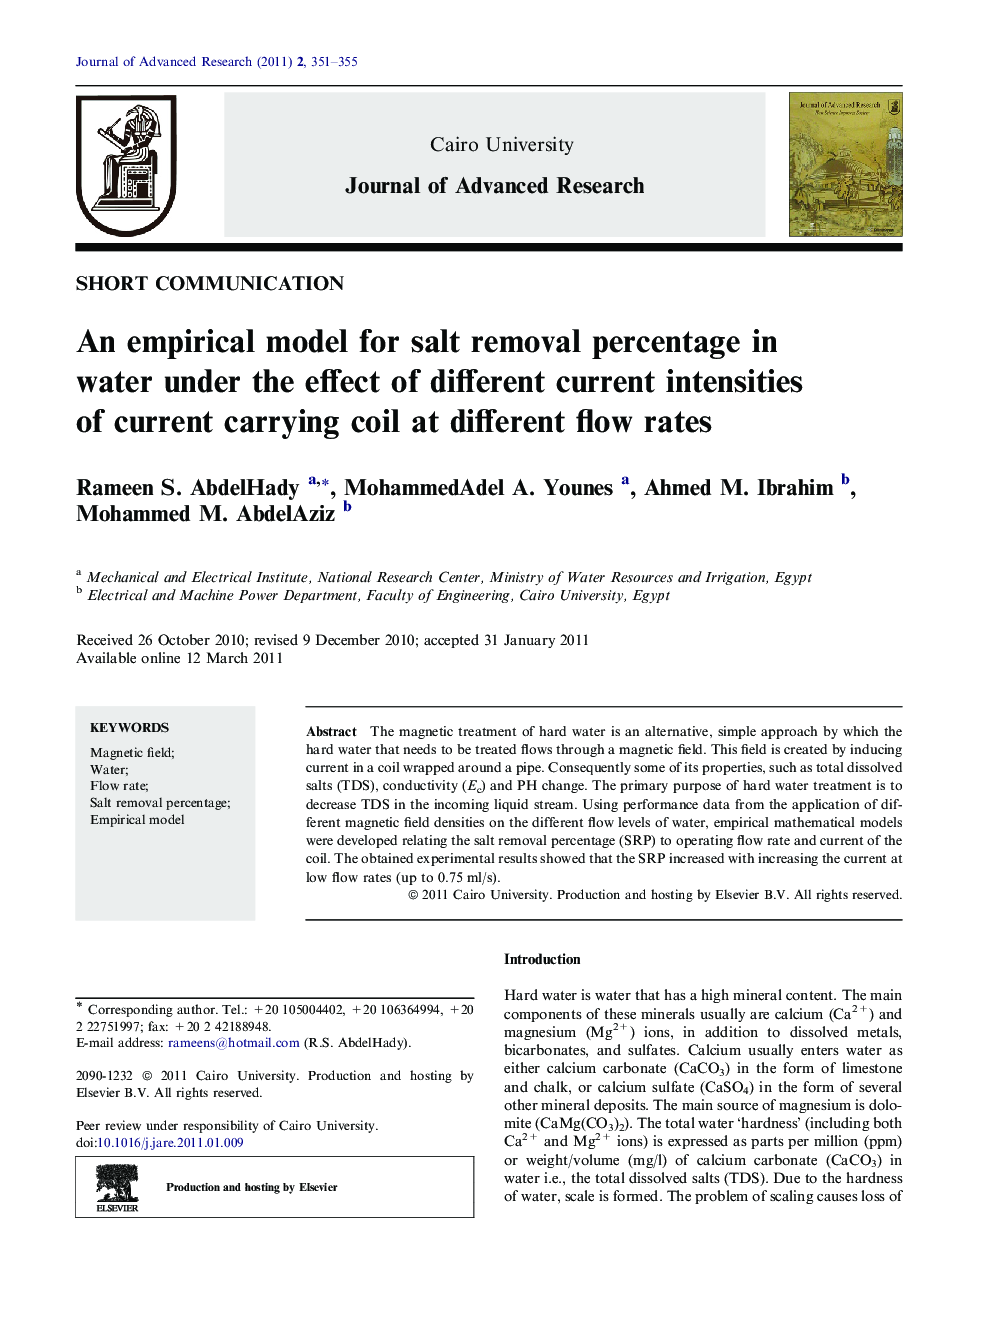 An empirical model for salt removal percentage in water under the effect of different current intensities of current carrying coil at different flow rates